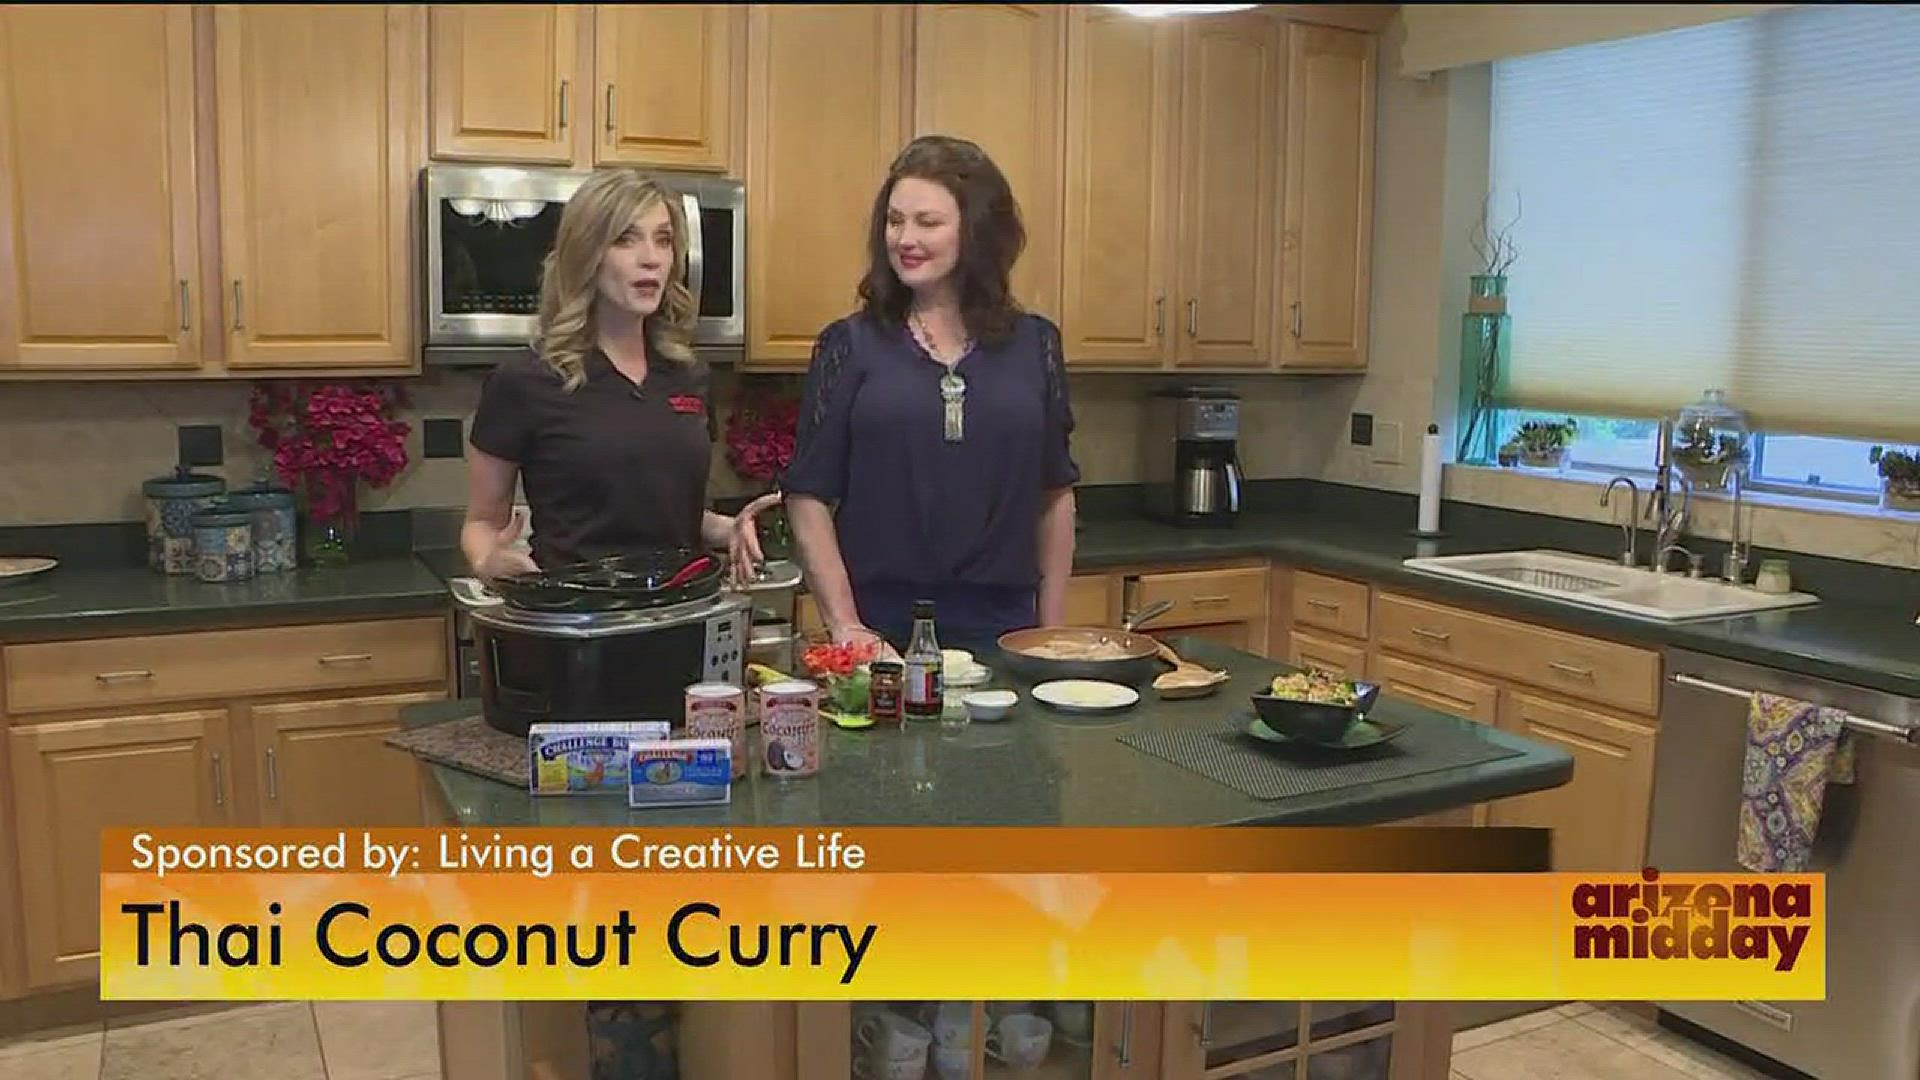 Suzanne Clark, of LivingACreativeLife.net, shows us her recipe for Thai Coconut Curry - using an instapot!